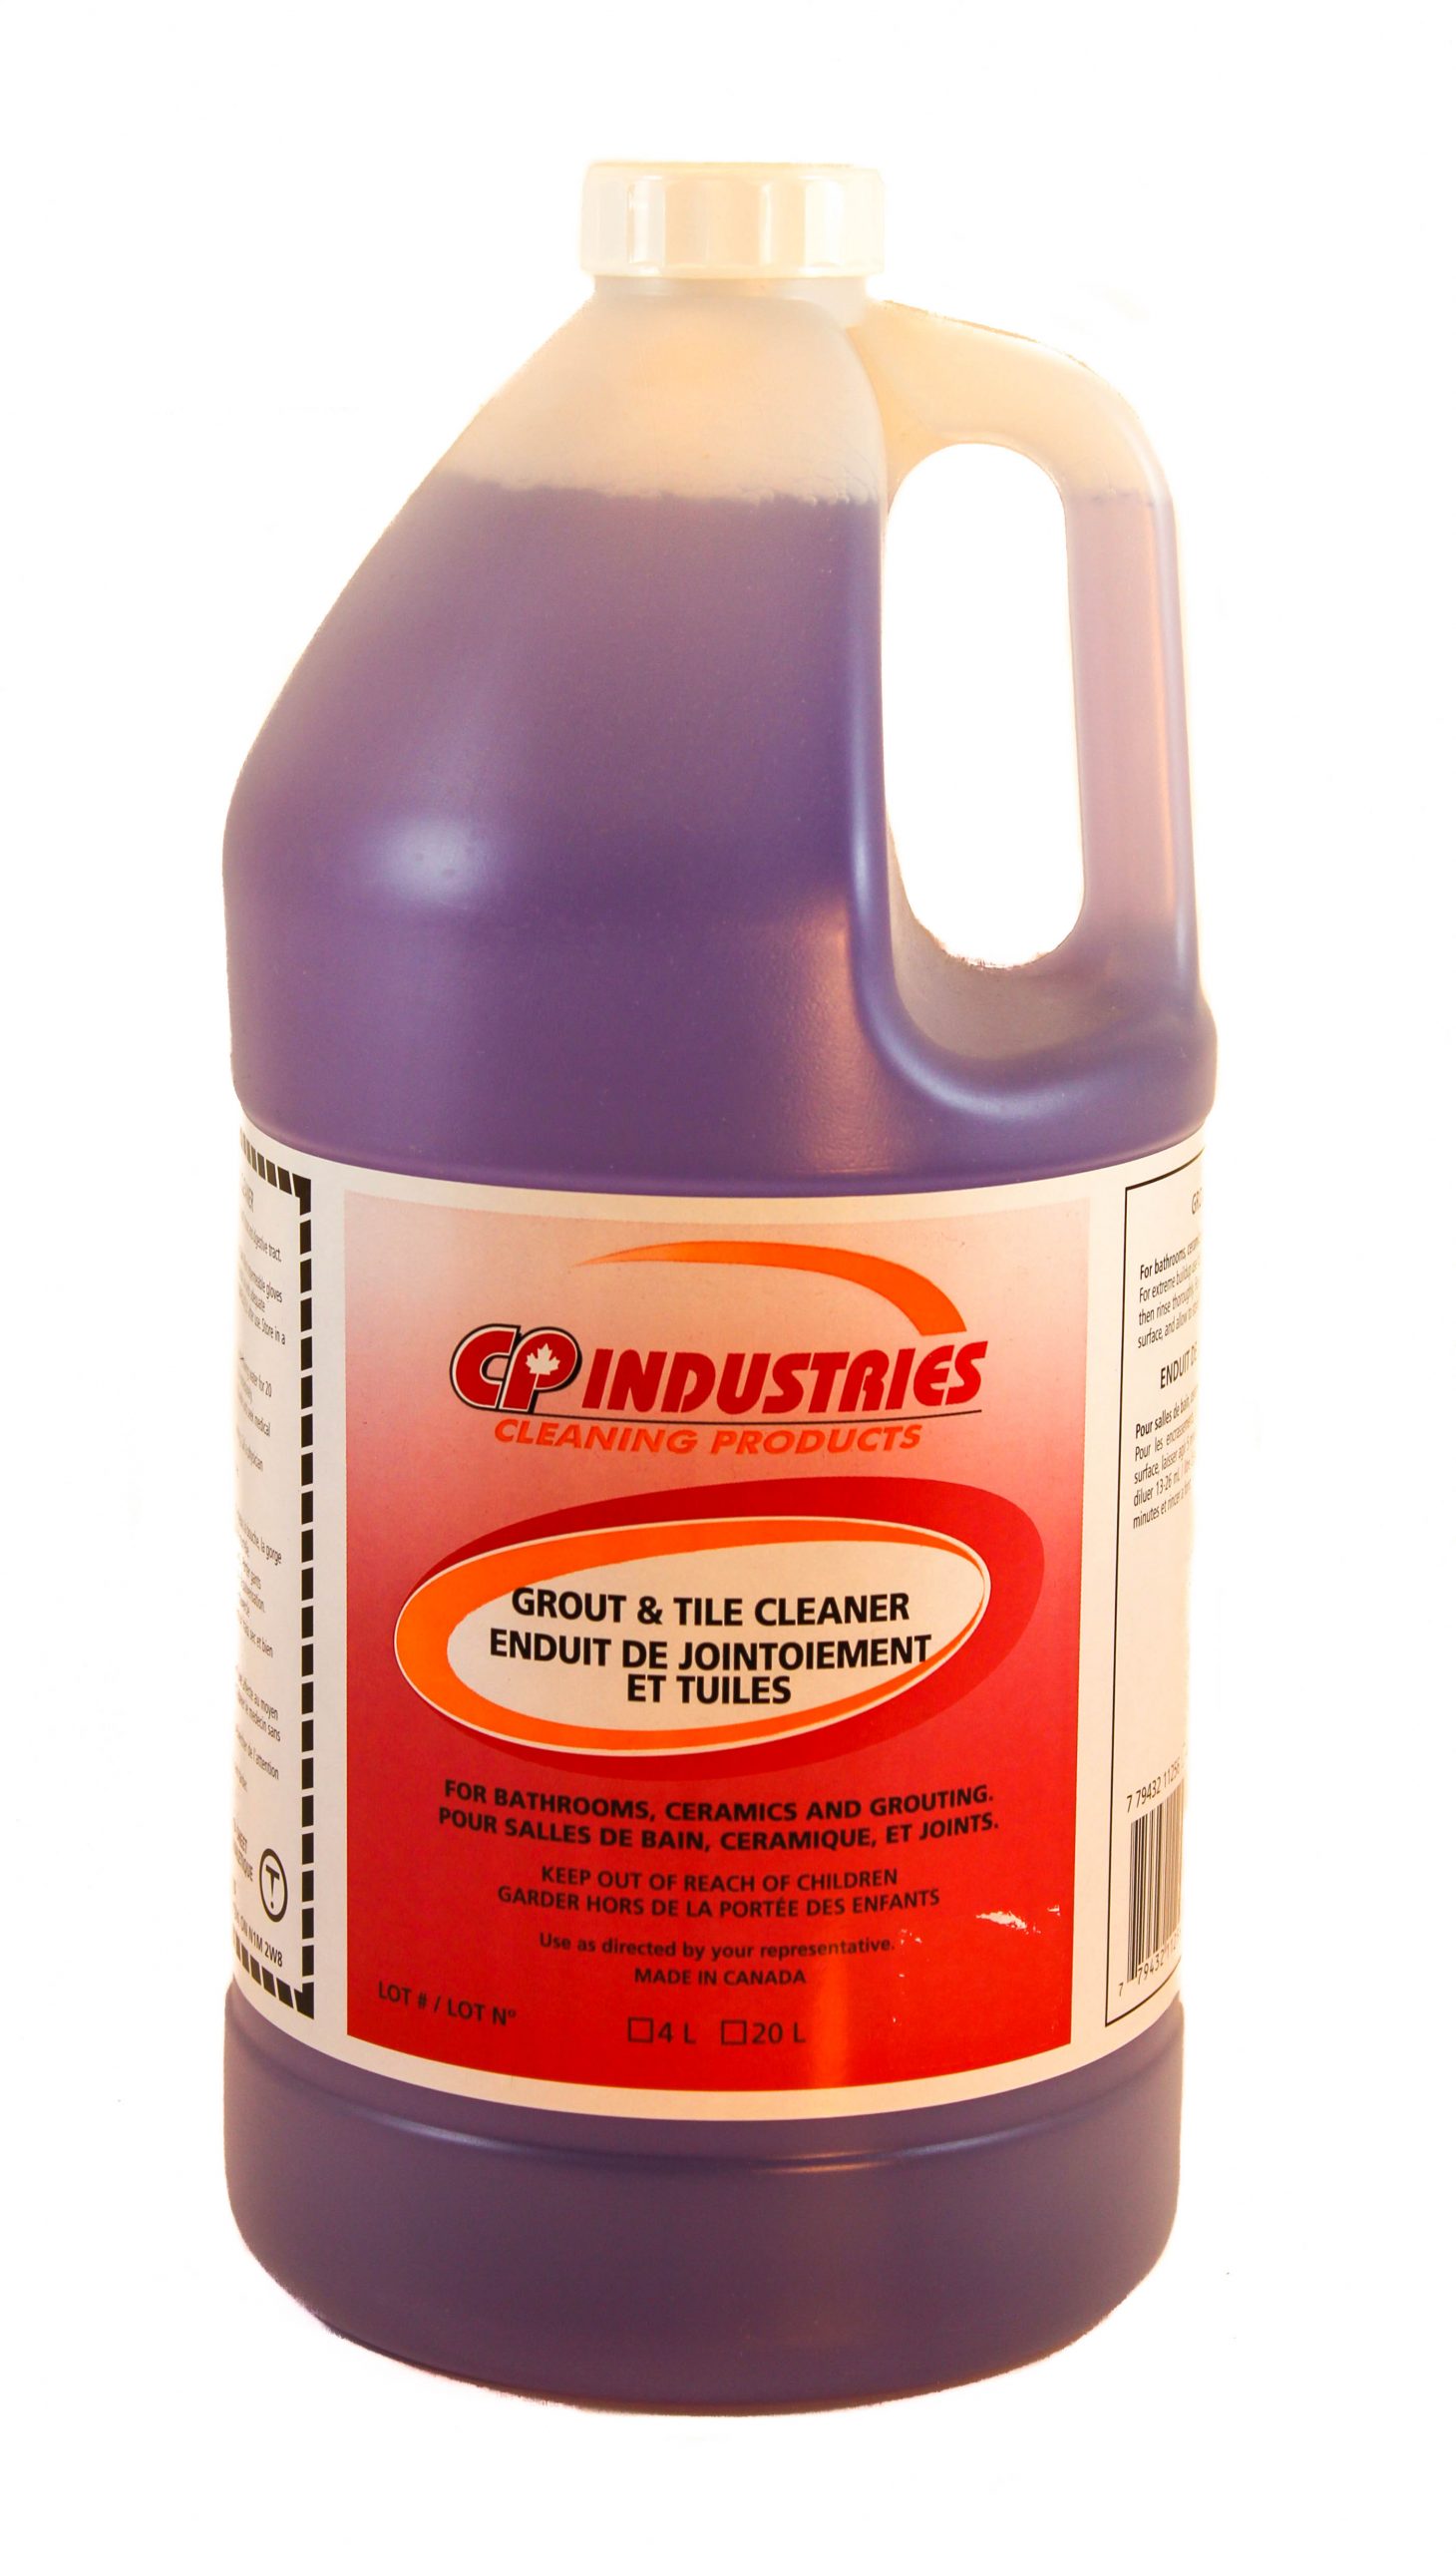 CP Industries: Grout & Tile Cleaner for bathrooms, ceramics and grouting